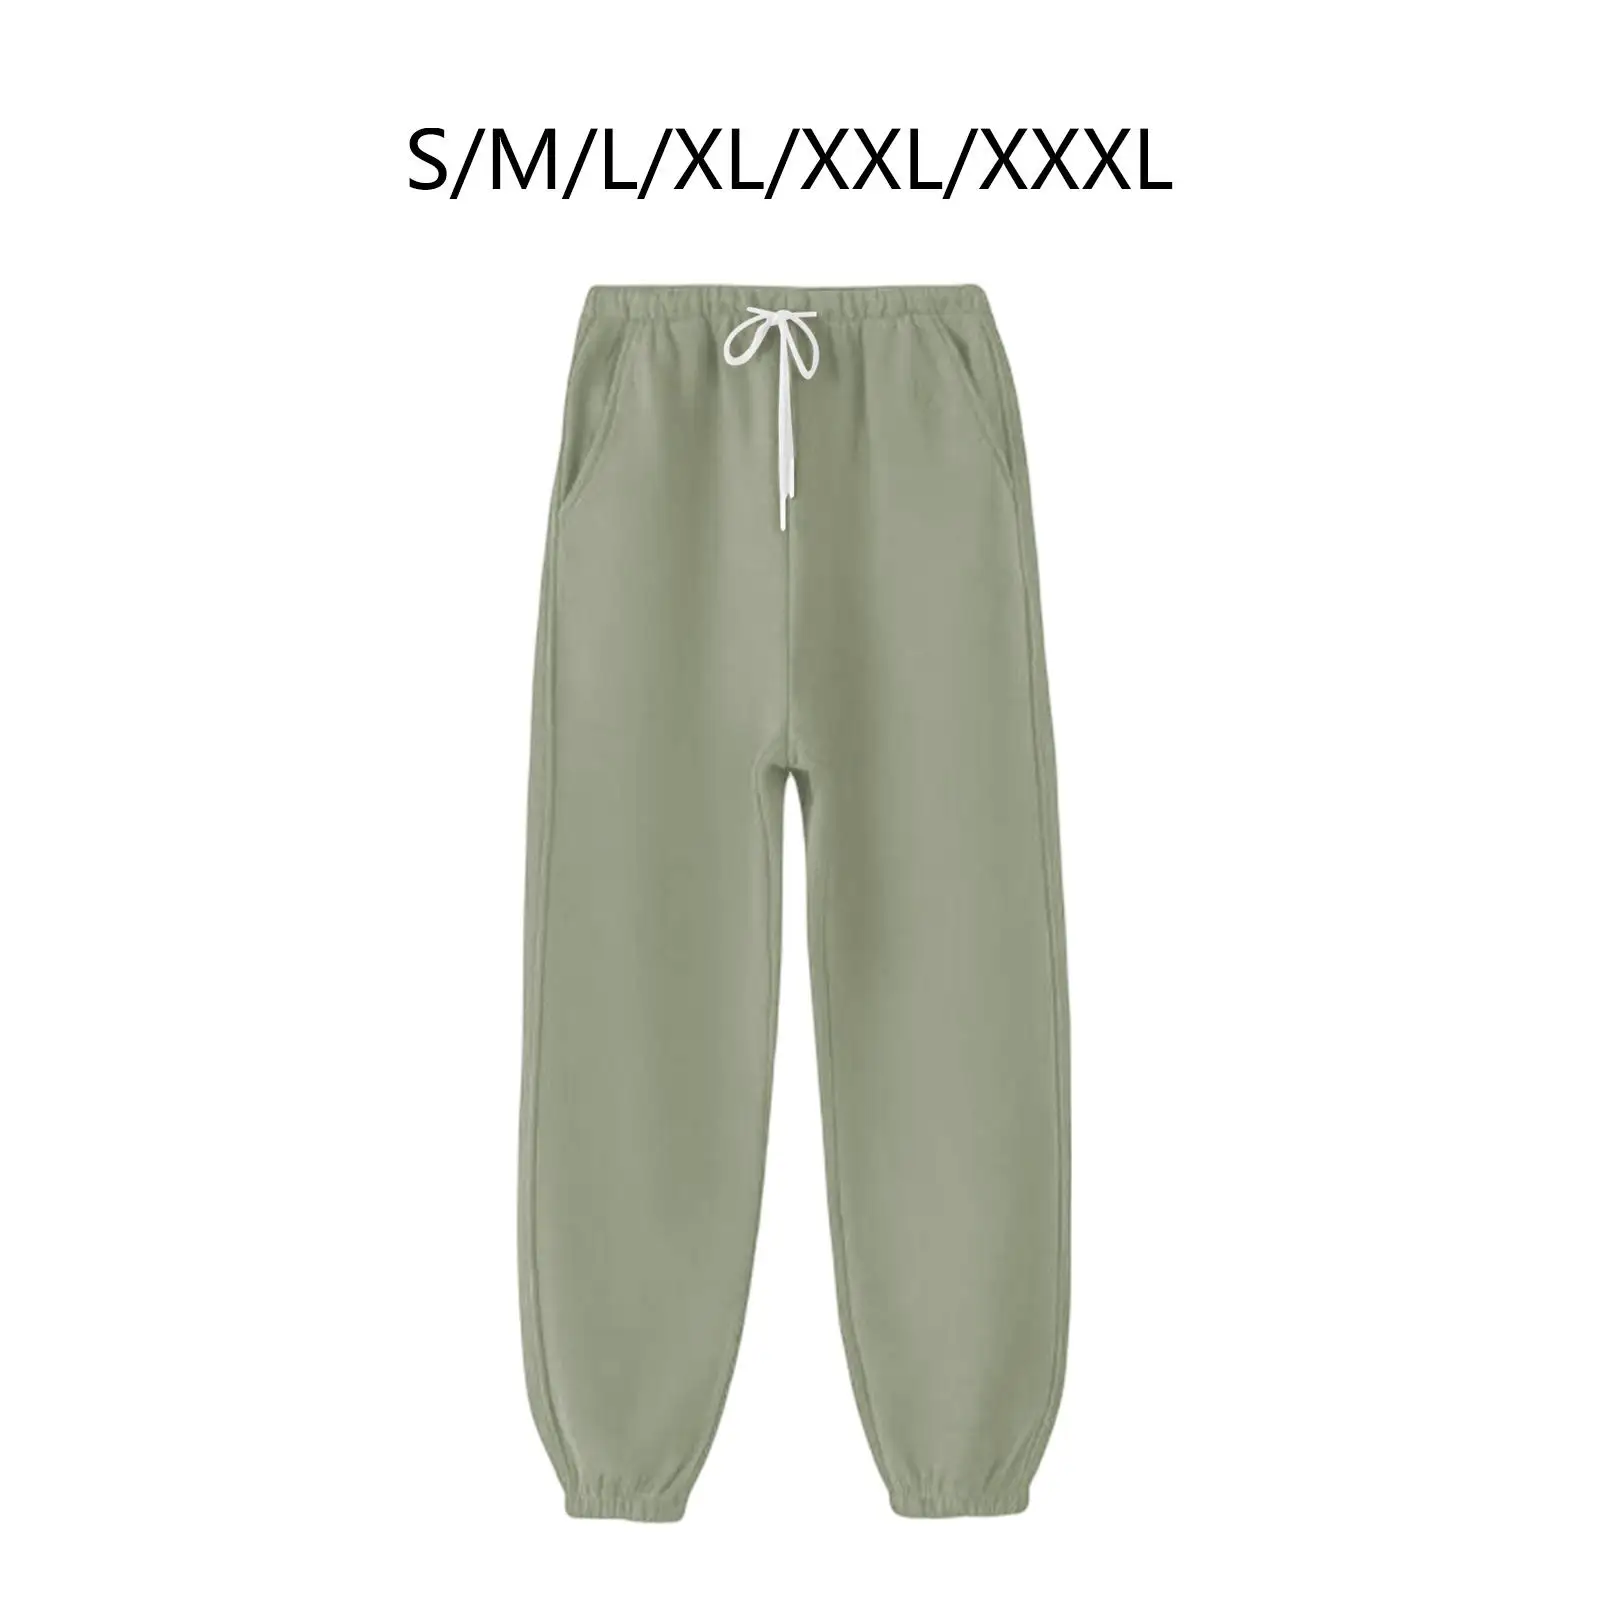 Plush Lined Sweatpants, Casual Harem Casual Trousers Jogger Pants for Sports Spring